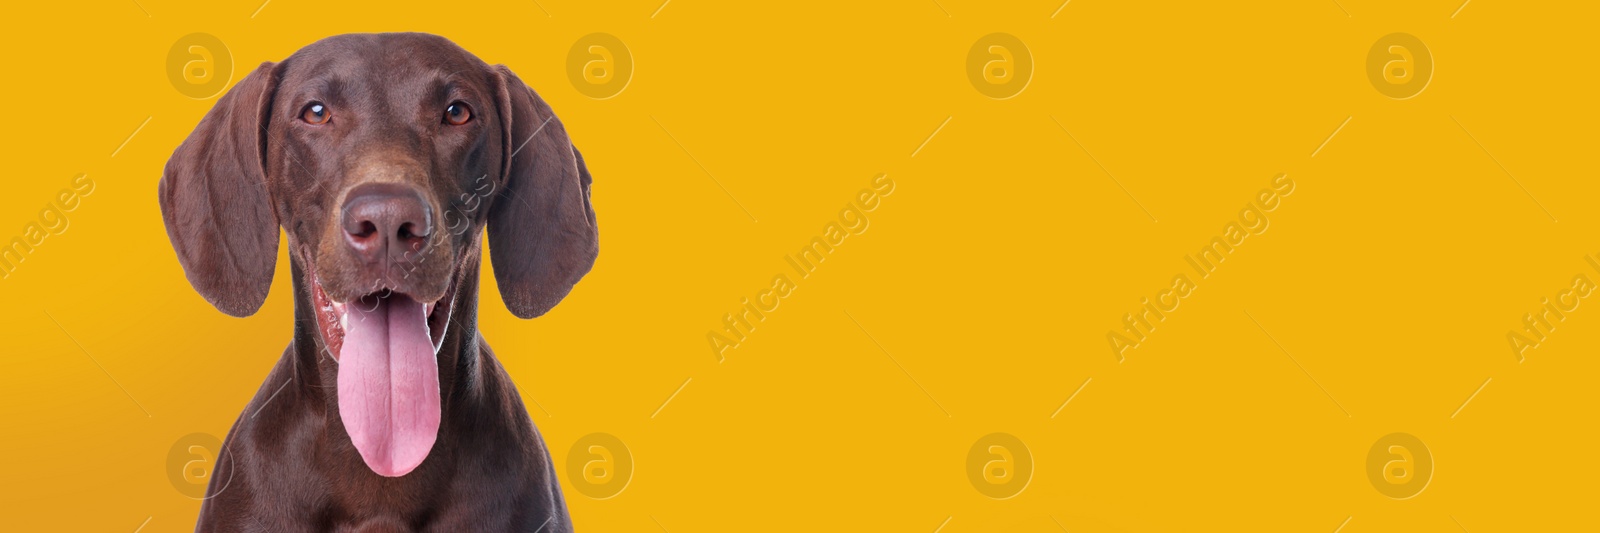 Image of Happy pet. Cute German Shorthaired Pointer dog smiling on yellow background, space for text. Banner design